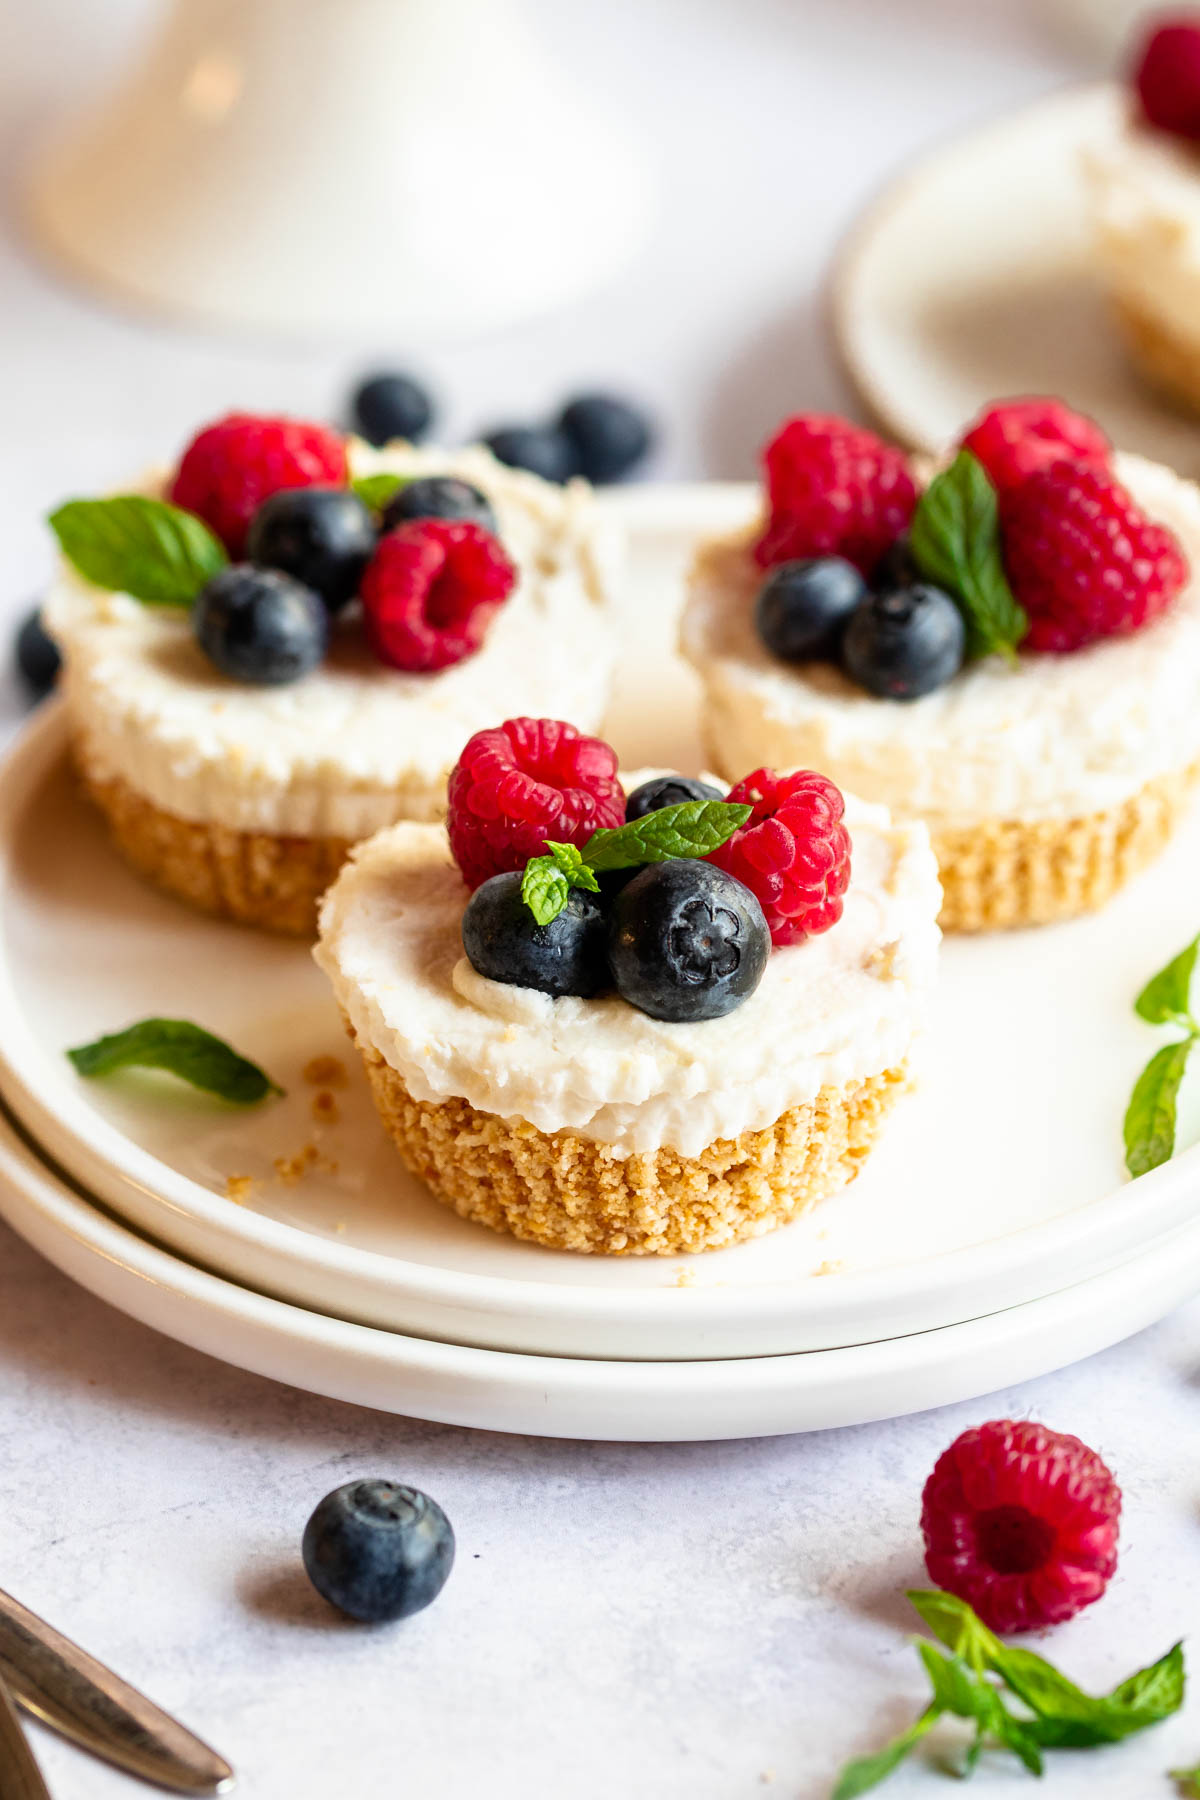 Three mini cheesecakes on a white plate with berries on top.